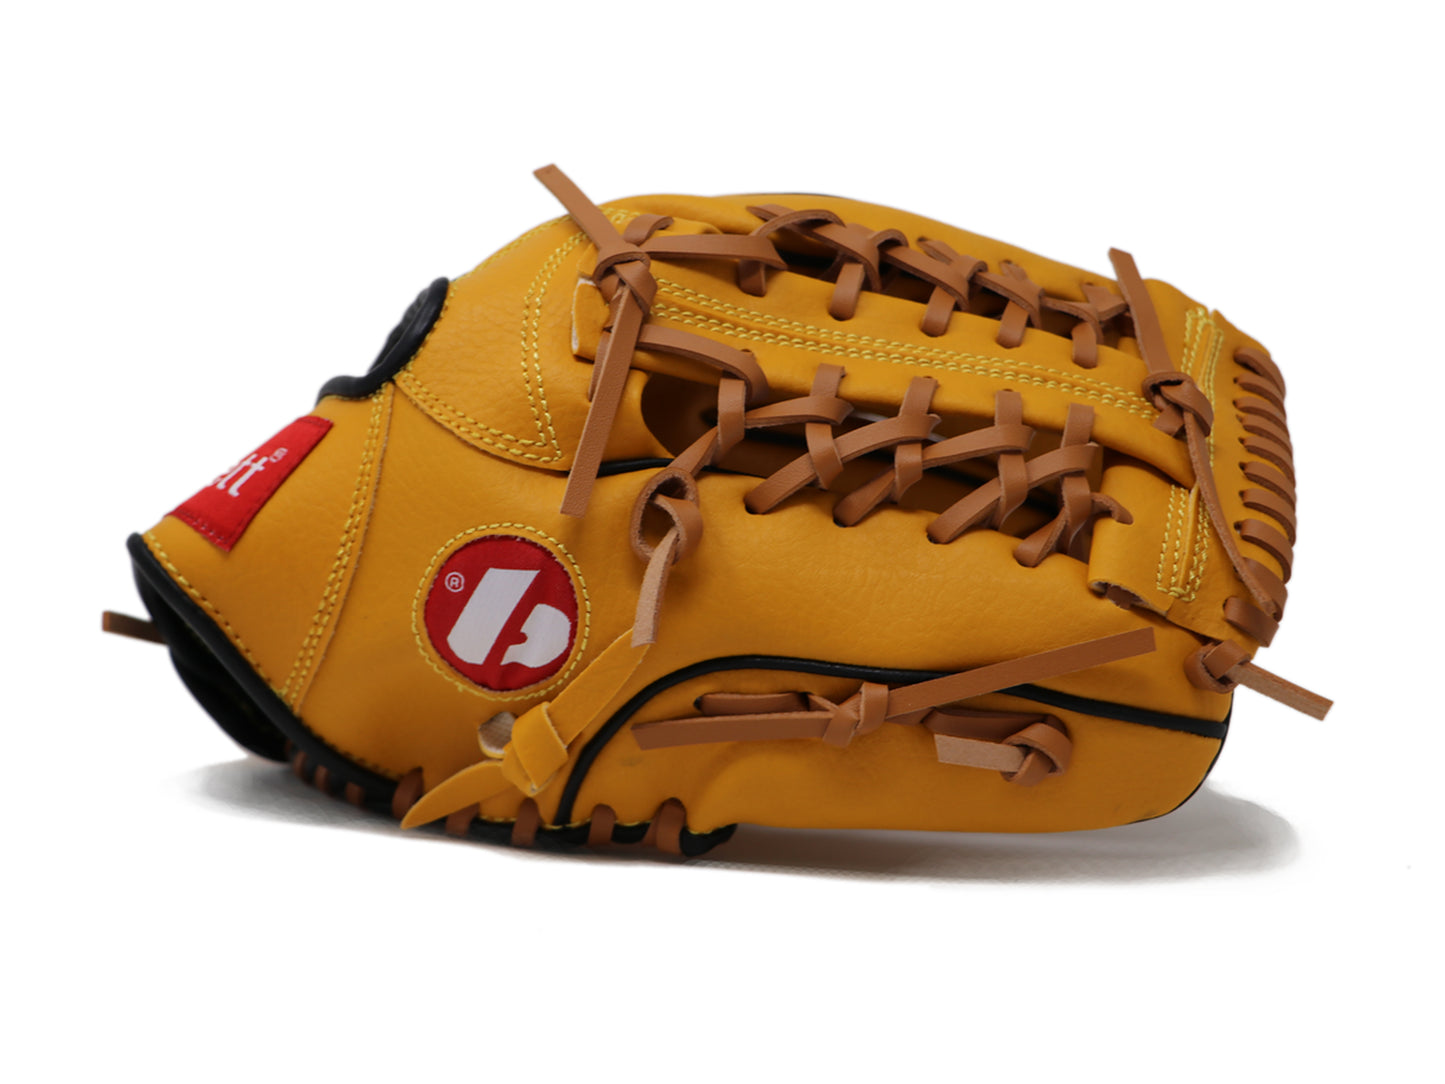 JL-120 - Baseball glove, outfield, polyurethane, size 12.5 ", Tan color (Right Hand Throw)